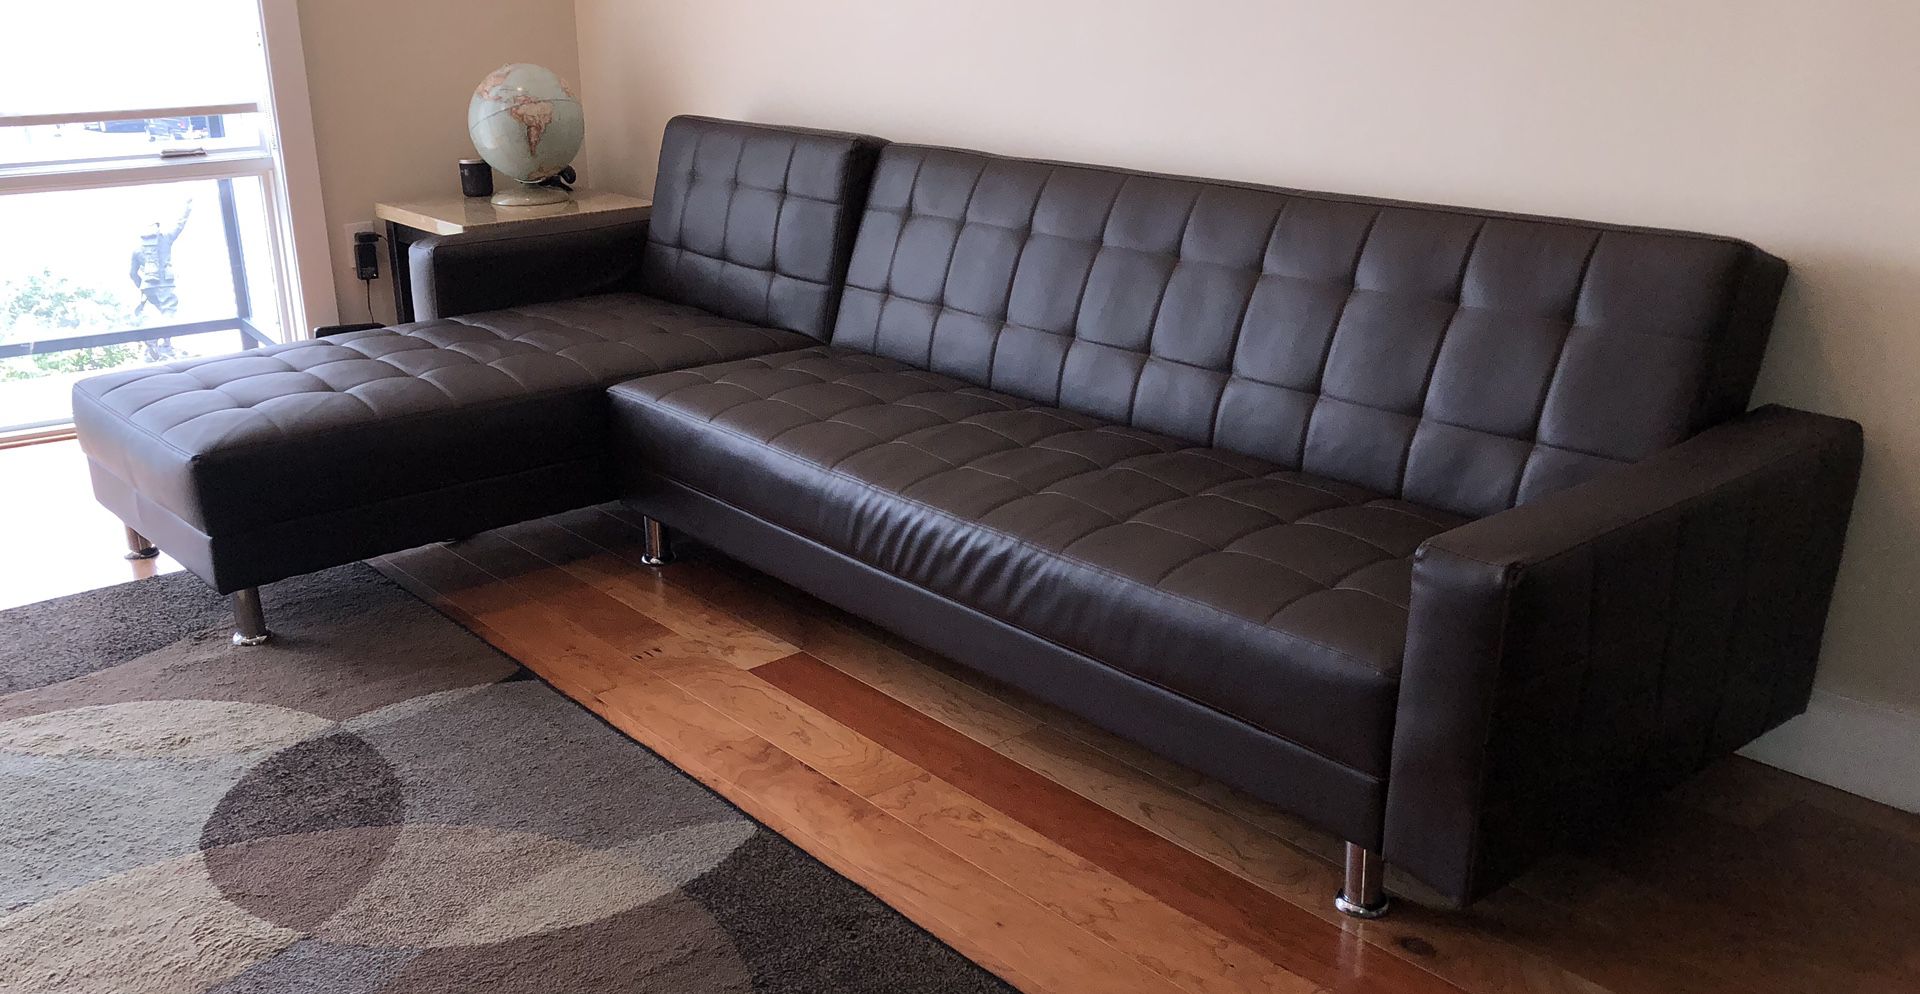 Leather Sleeper Sectional Couch - 2018